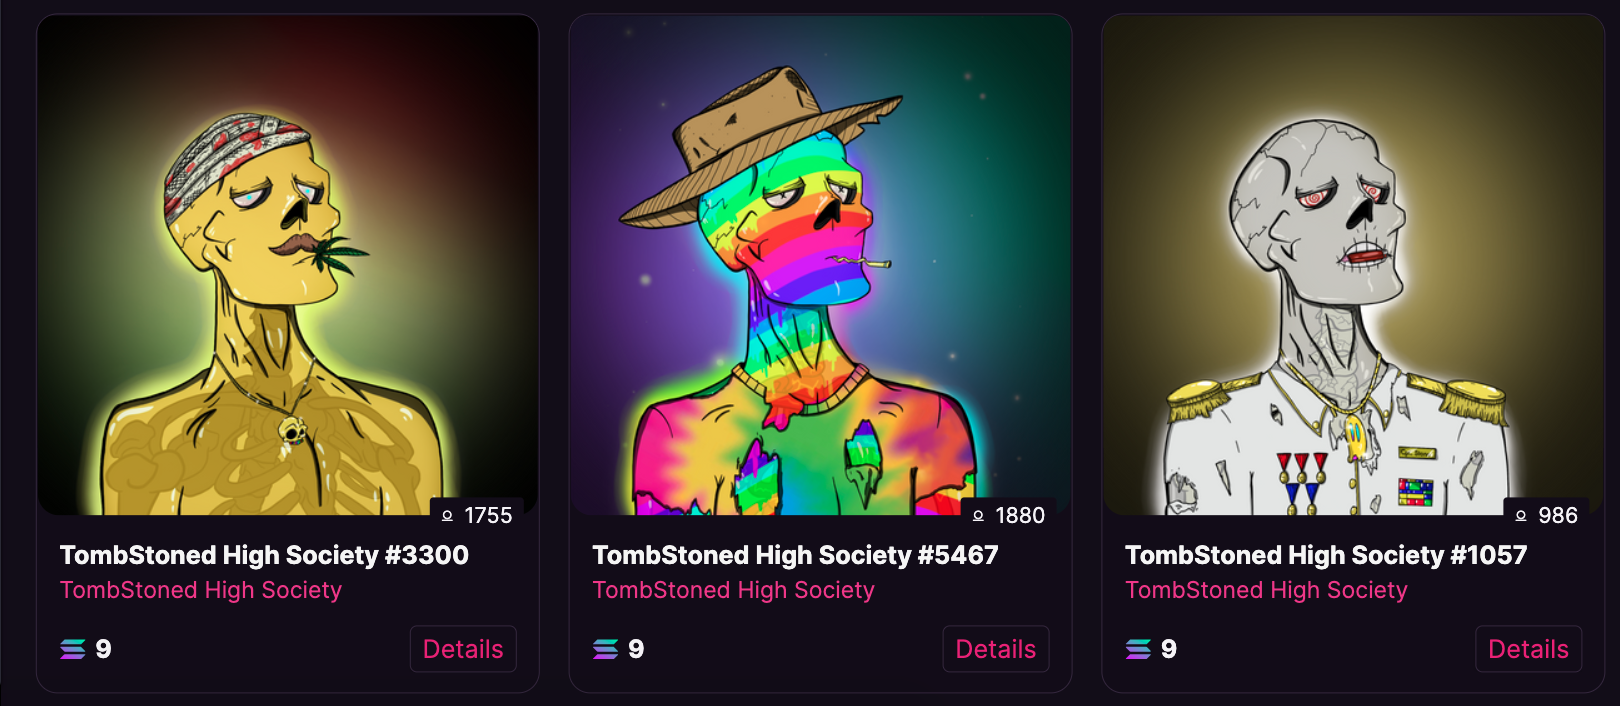 Tombstoned High Society NFT on a marketplace